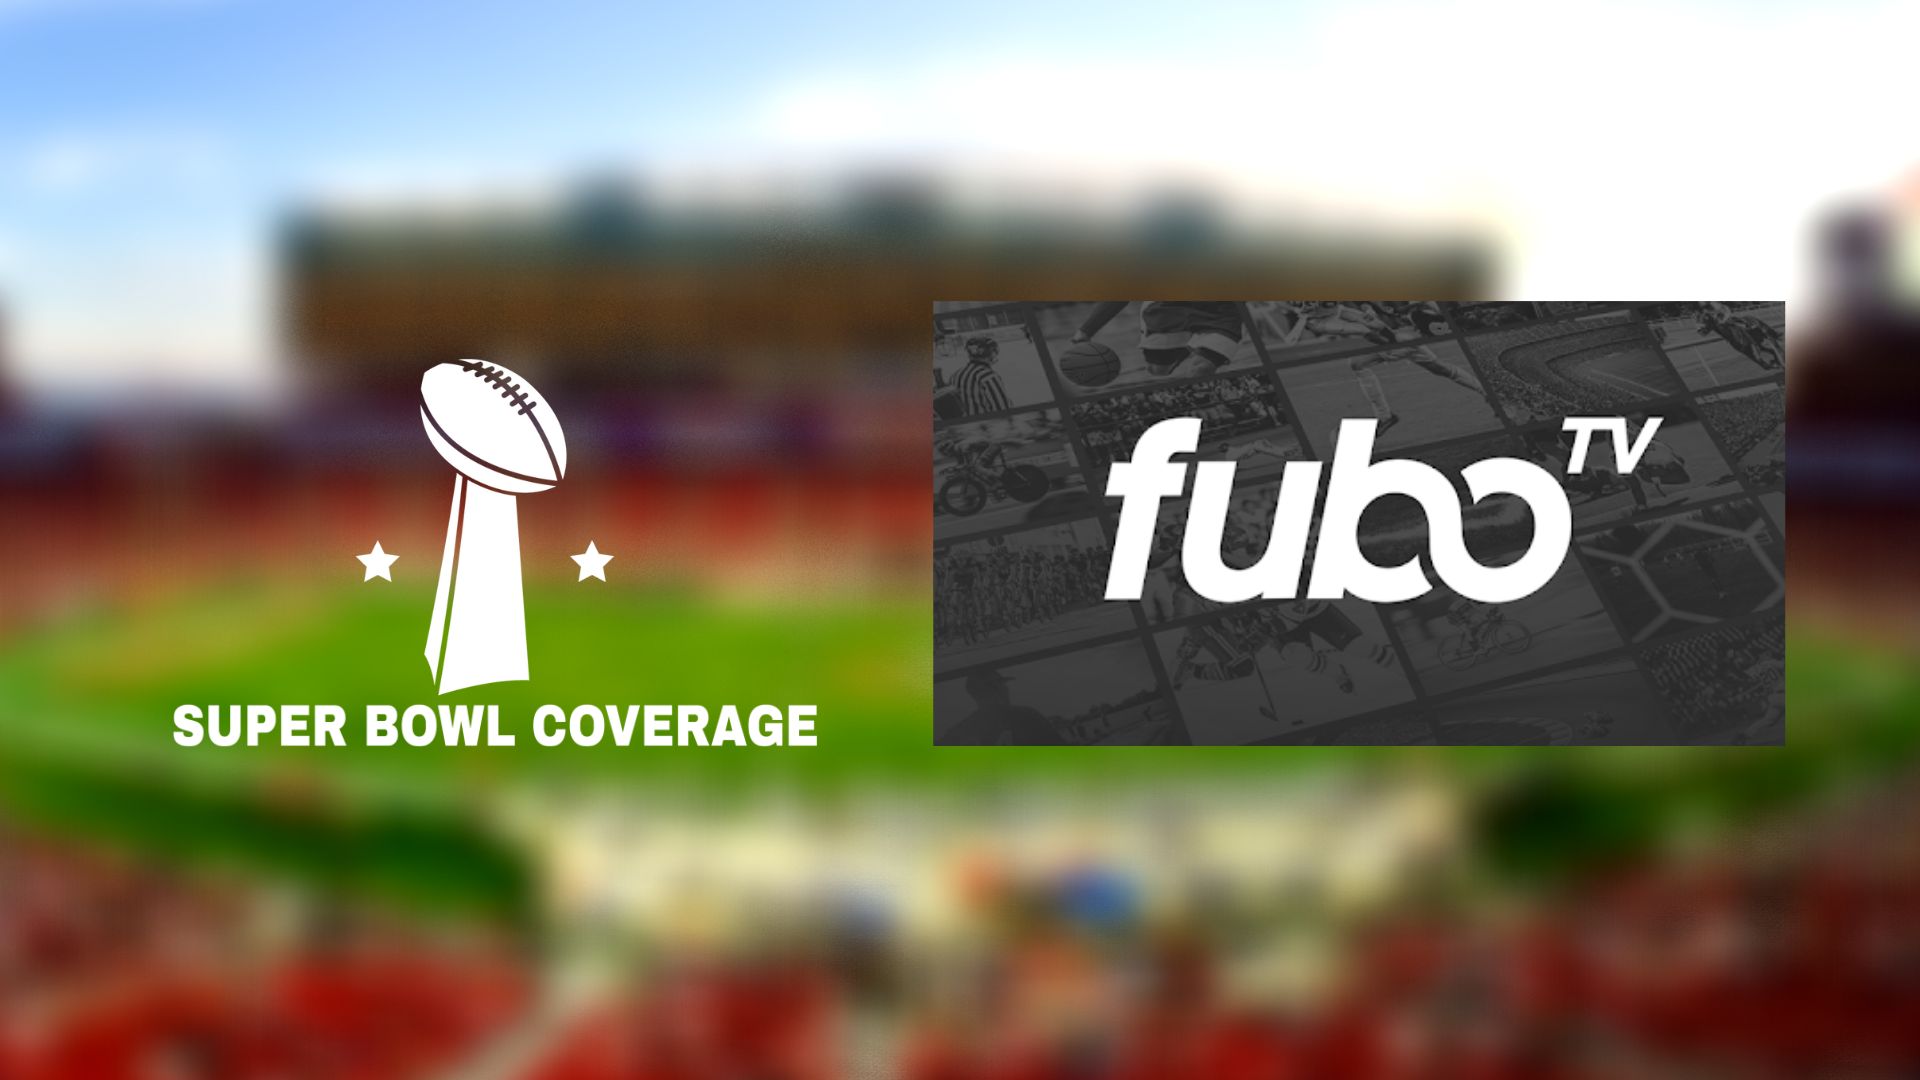 How to Watch Super Bowl on fuboTV